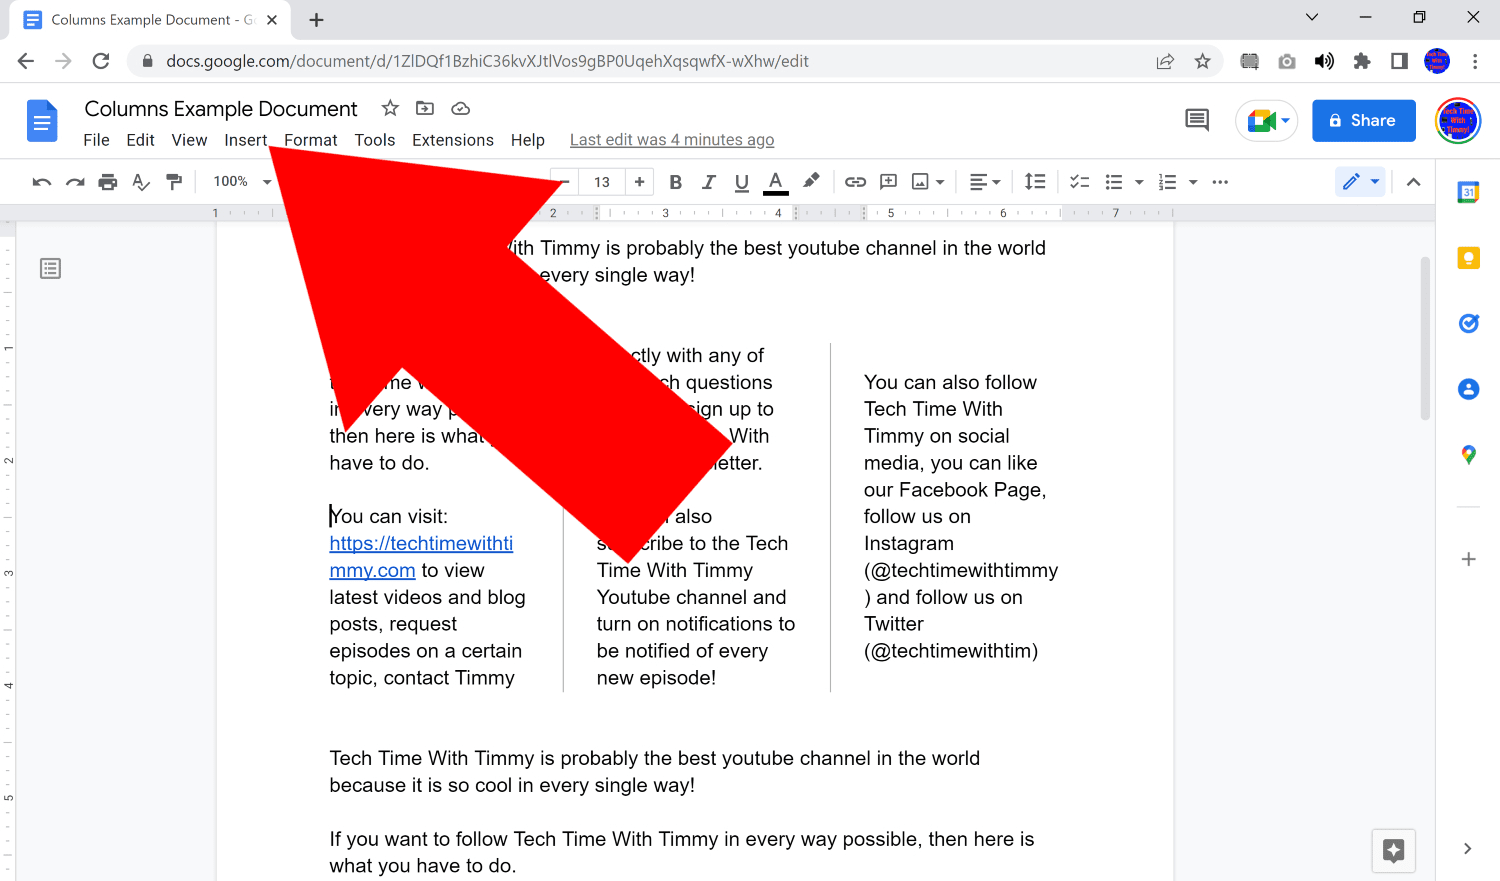 how to add columns on google docs